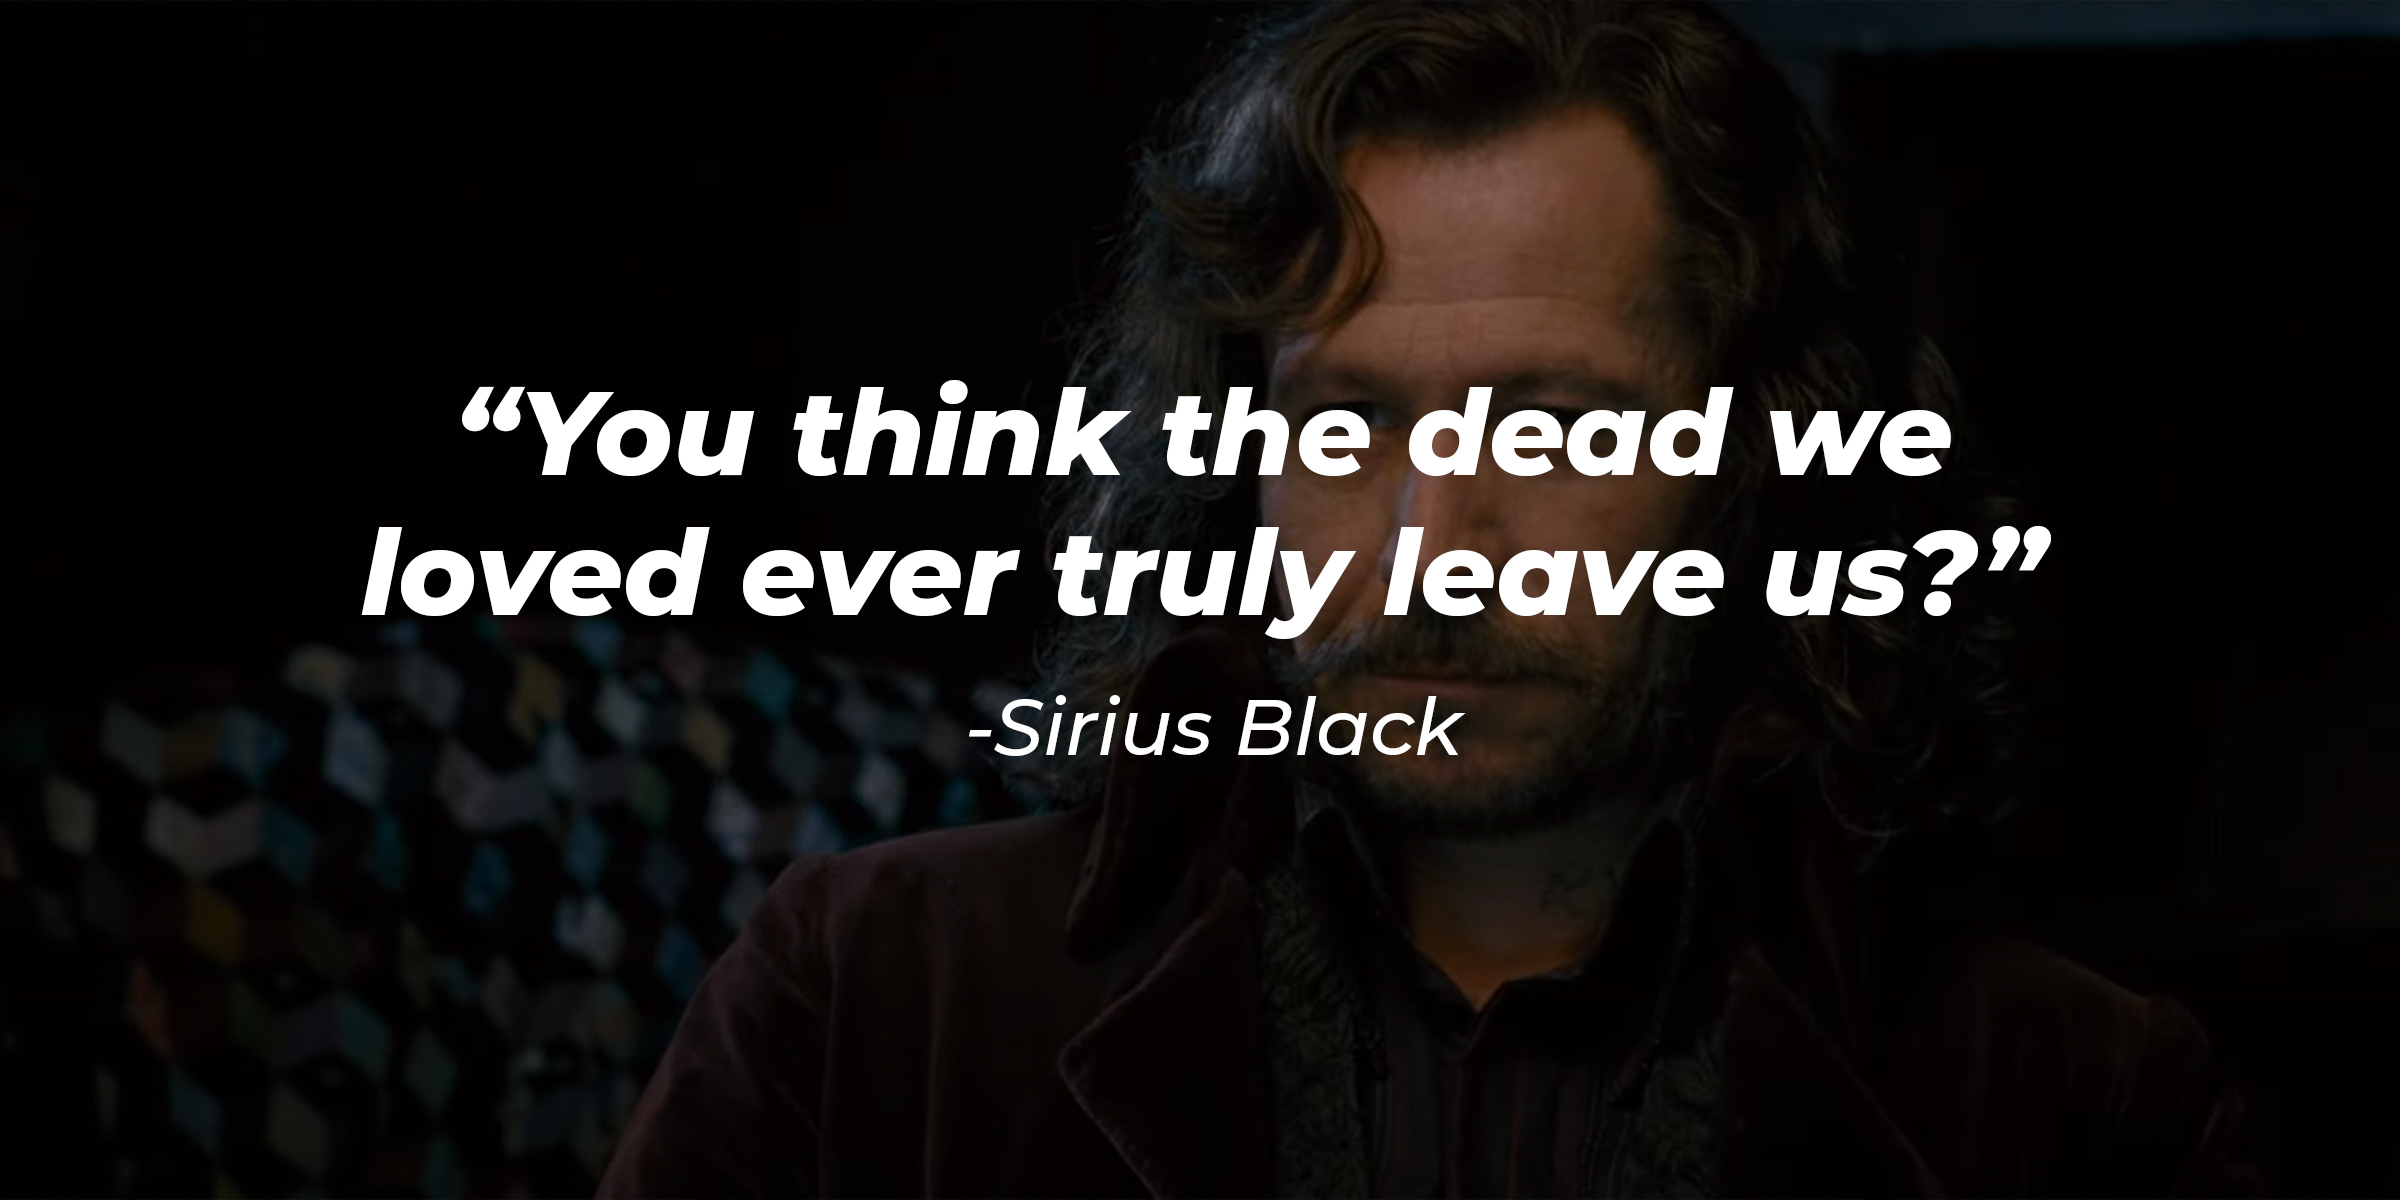 Sirius Black's quote: "You think the dead we loved ever truly leave us?" | Source: YouTube/harrypotter